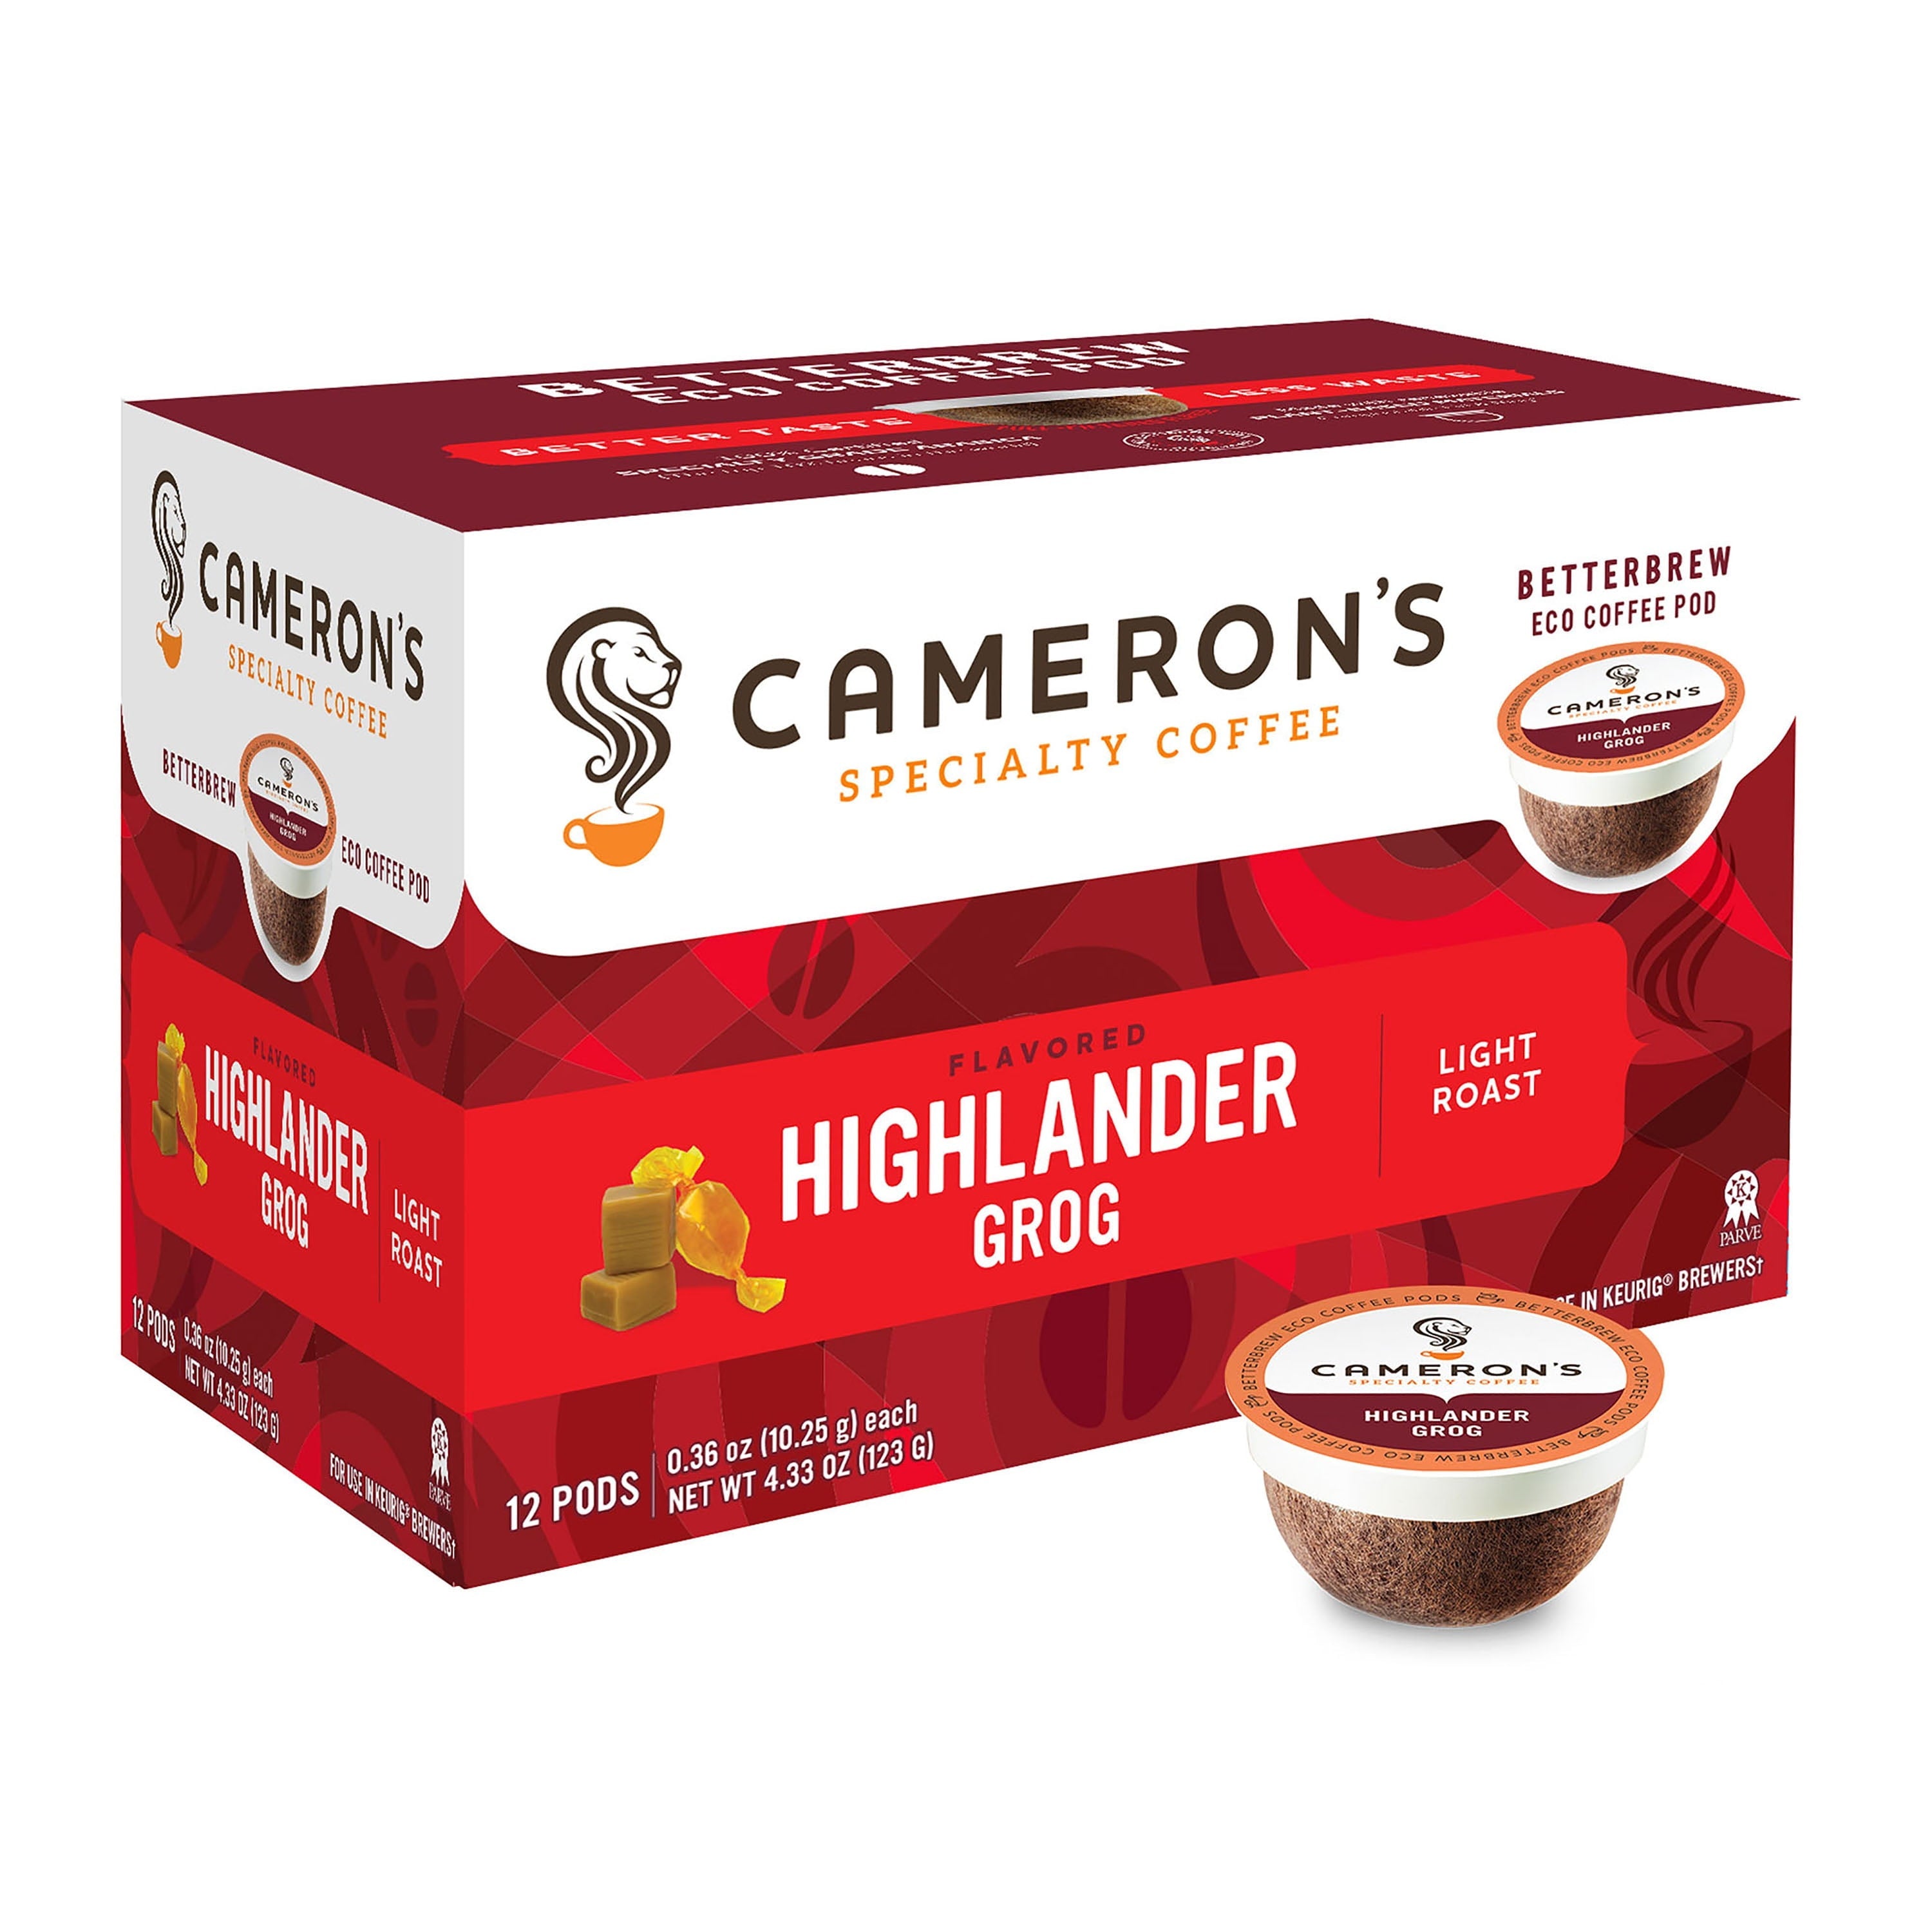 Cameron's Specialty Coffee Highlander Grog Flavored Single Serve Pods, 12 Ct Box